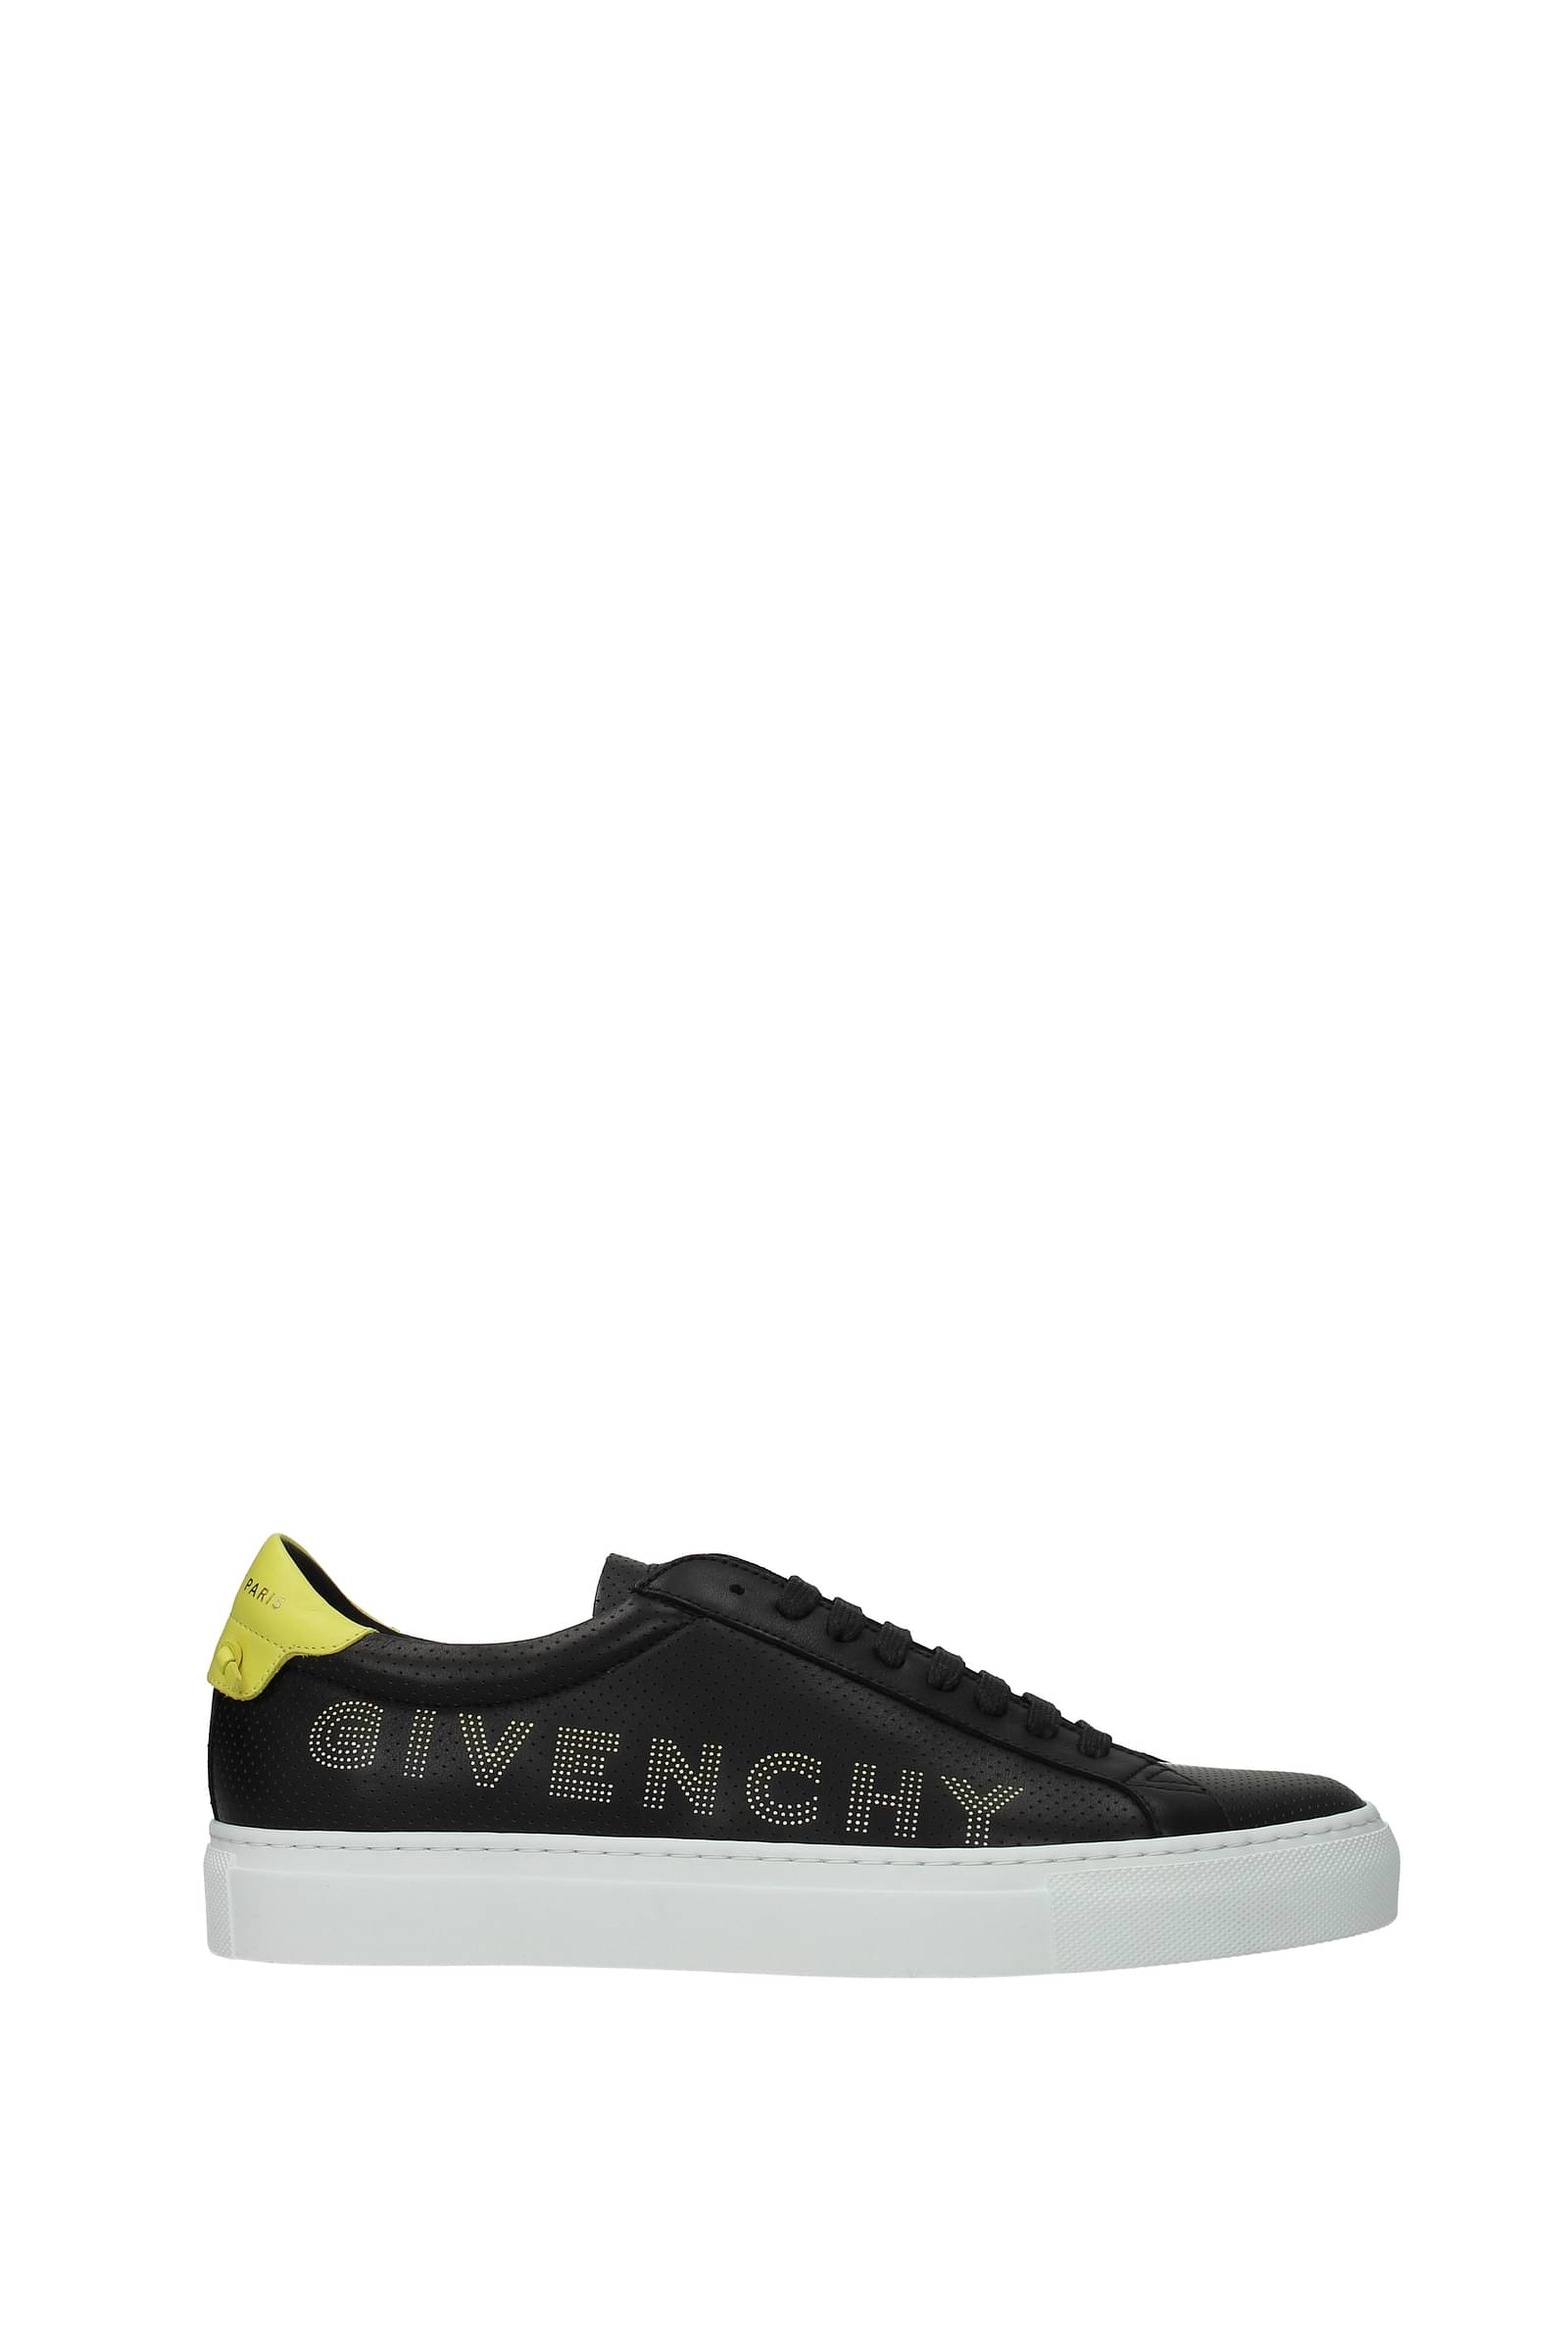 Givenchy G4 Low Top Sneaker in Black & White | FWRD